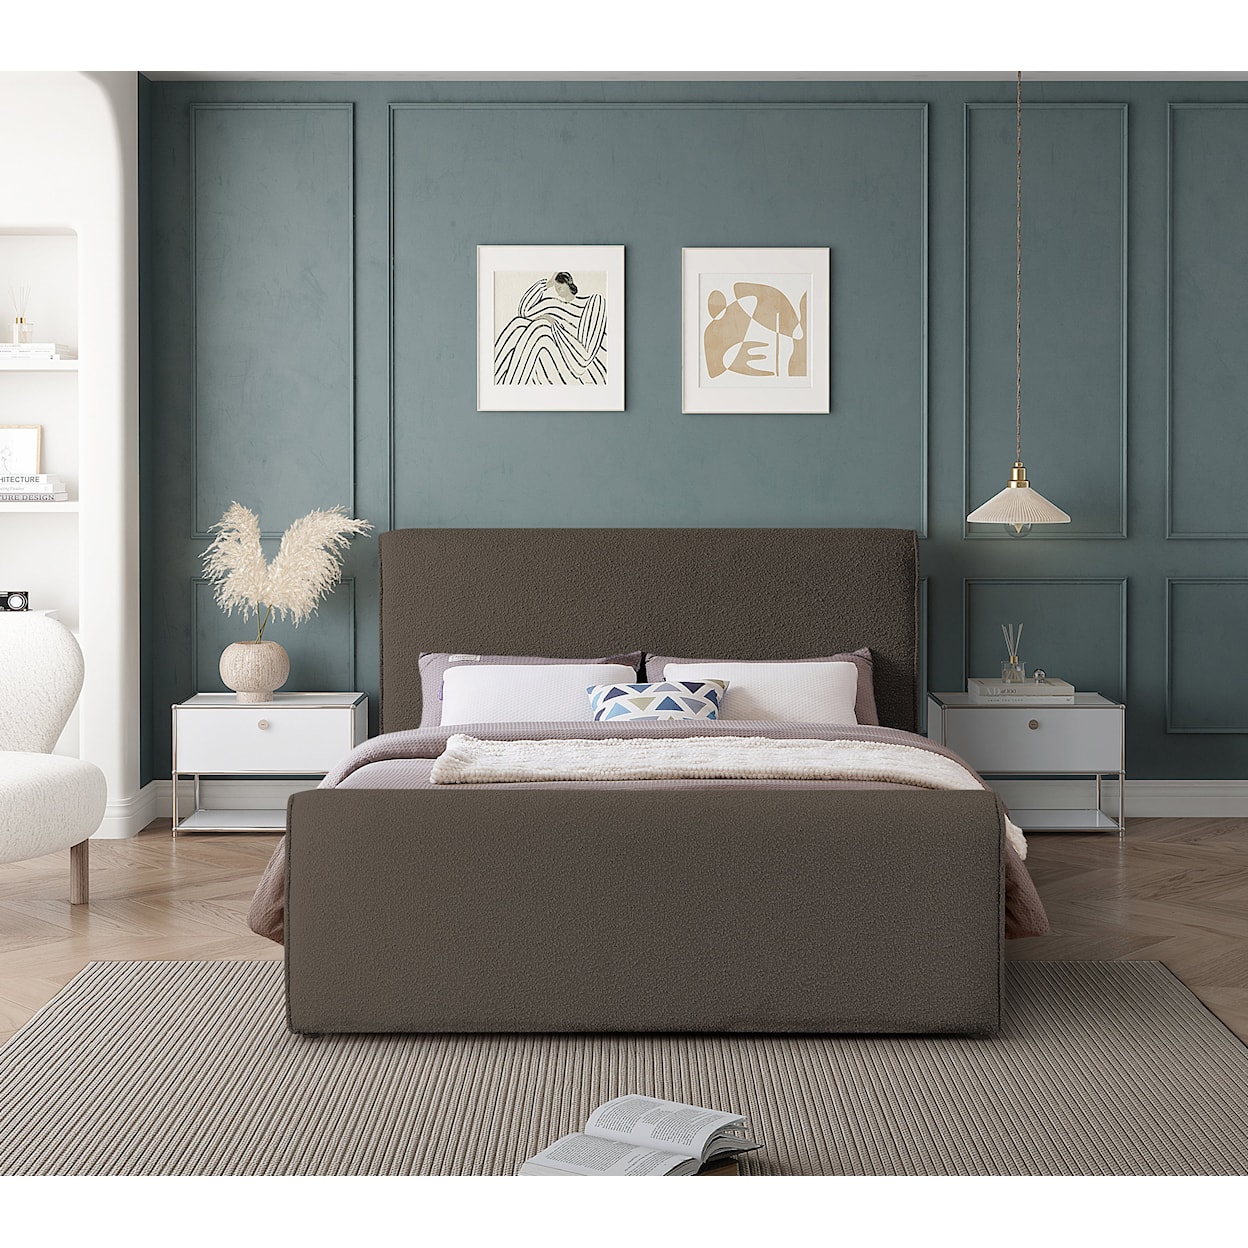 Meridian Furniture Stylus Queen Bed (3 Boxes)